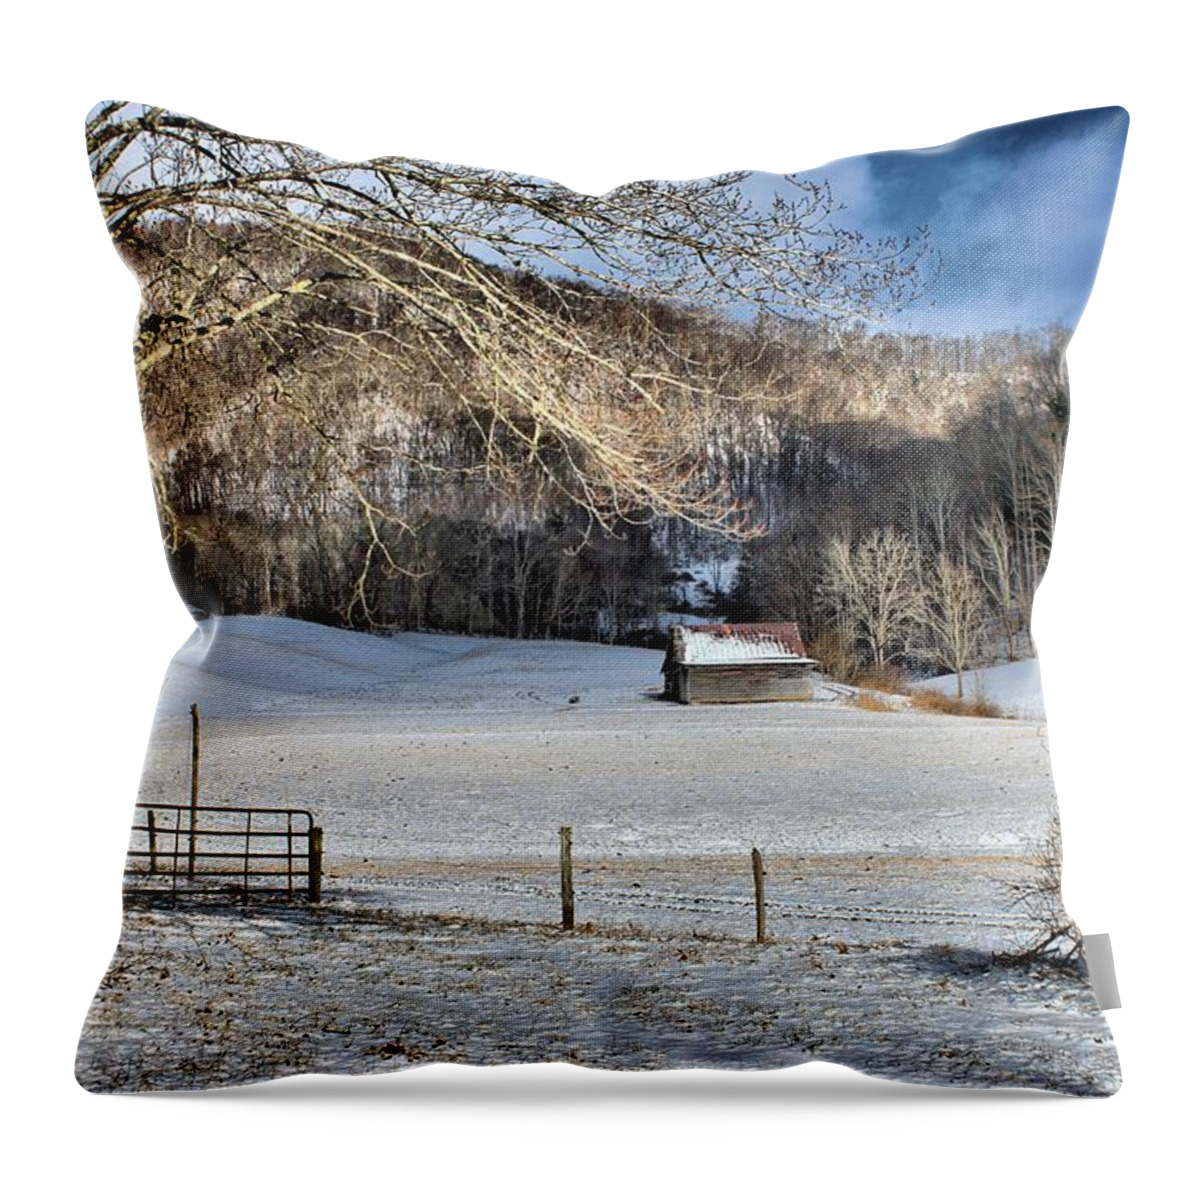 Carol R Montoya Throw Pillow featuring the photograph What More Could You Ask For by Carol Montoya